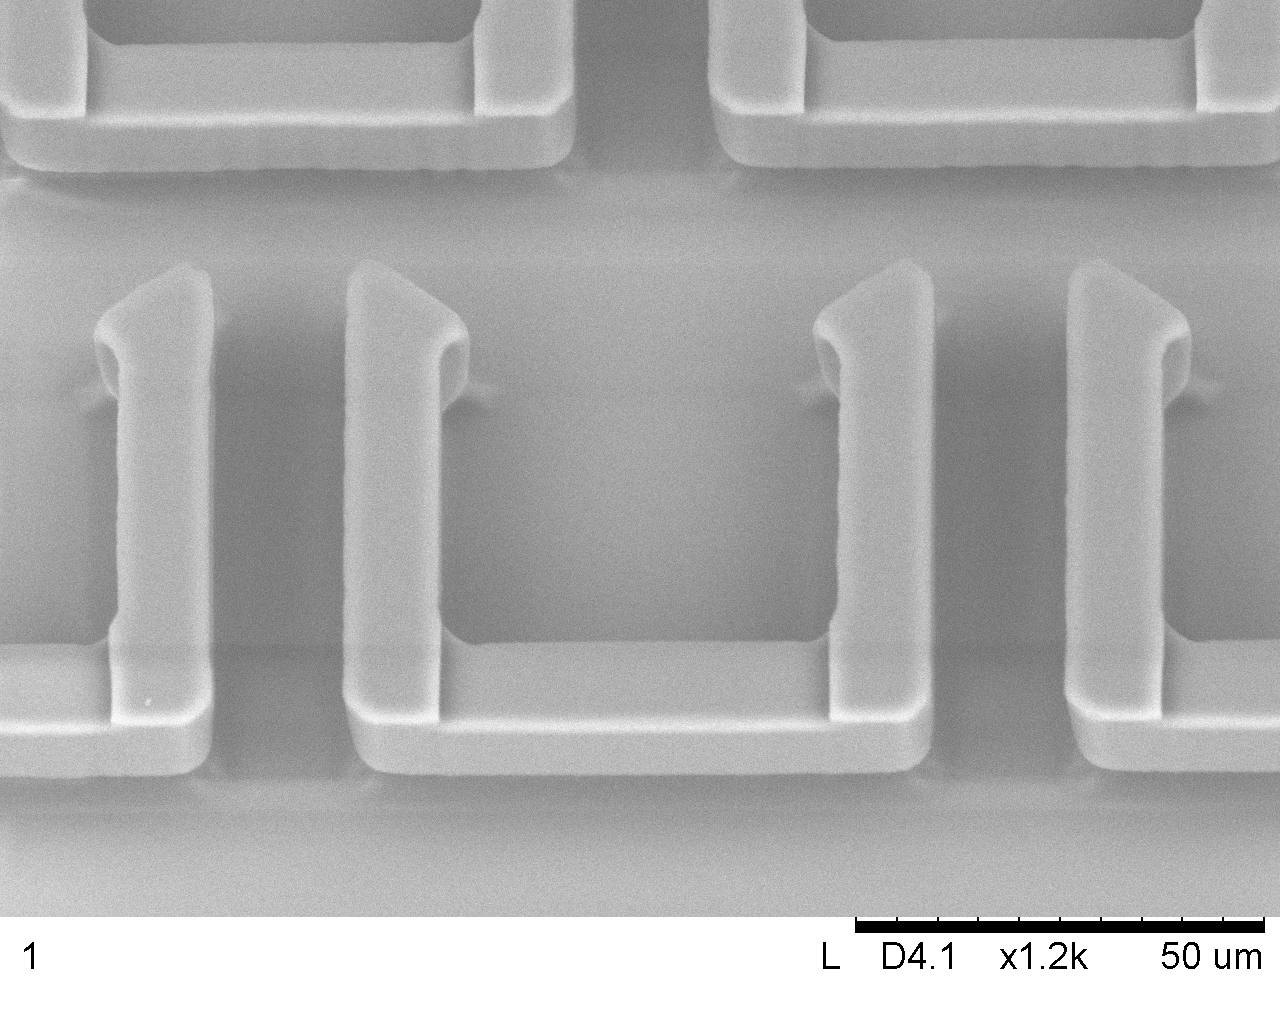 SEM image of a 2.5D structure in PDMS obtained by soft lithography.